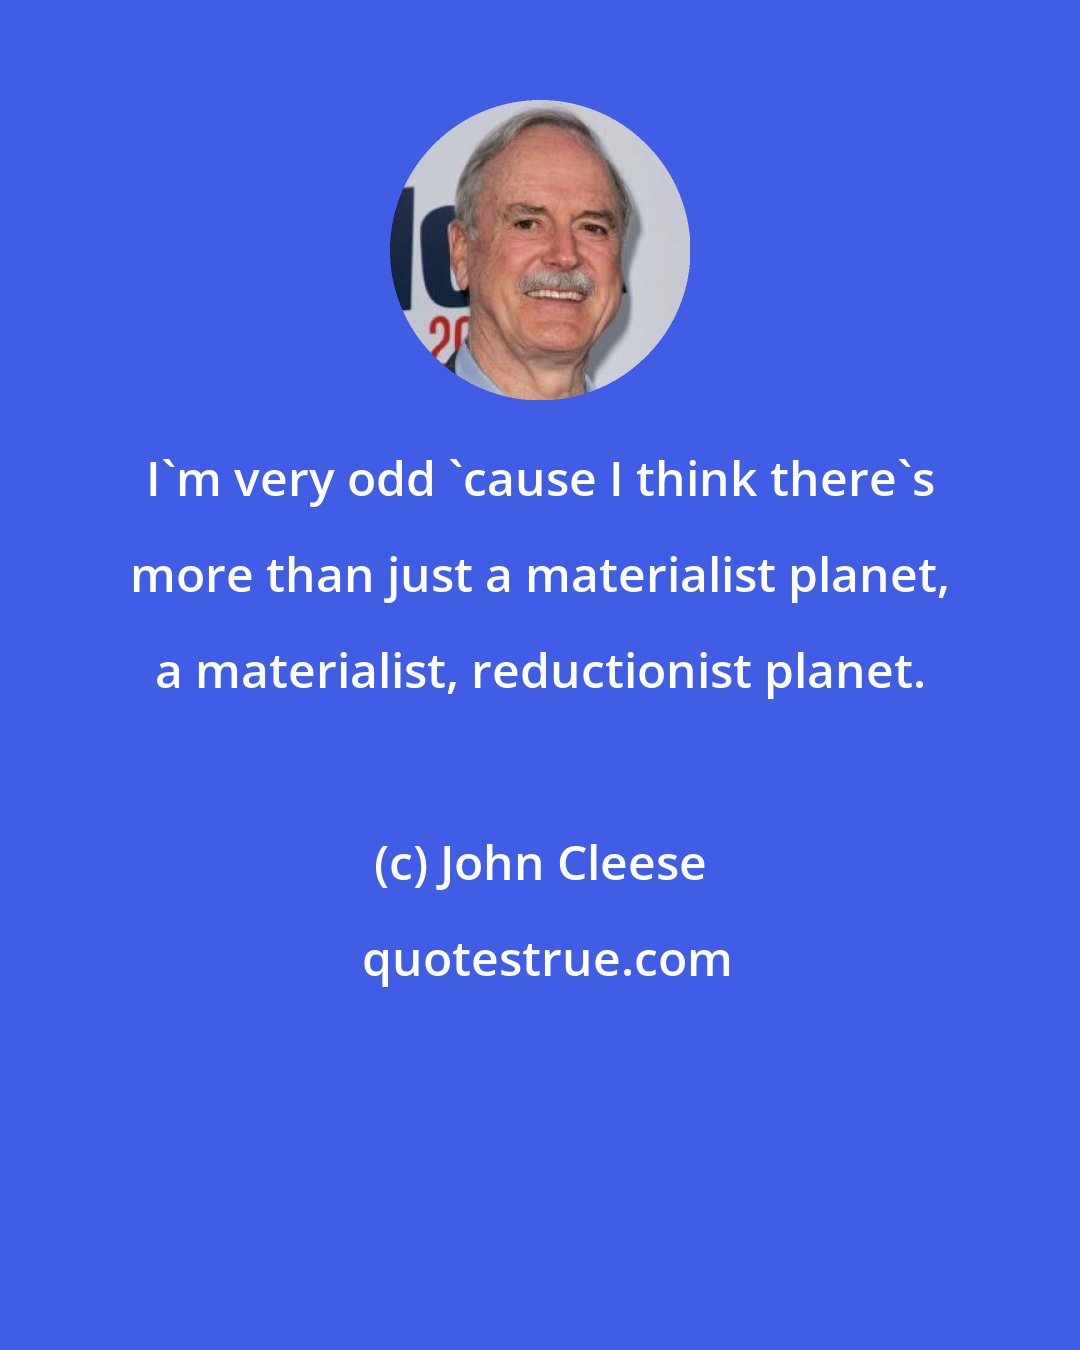 John Cleese: I'm very odd 'cause I think there's more than just a materialist planet, a materialist, reductionist planet.